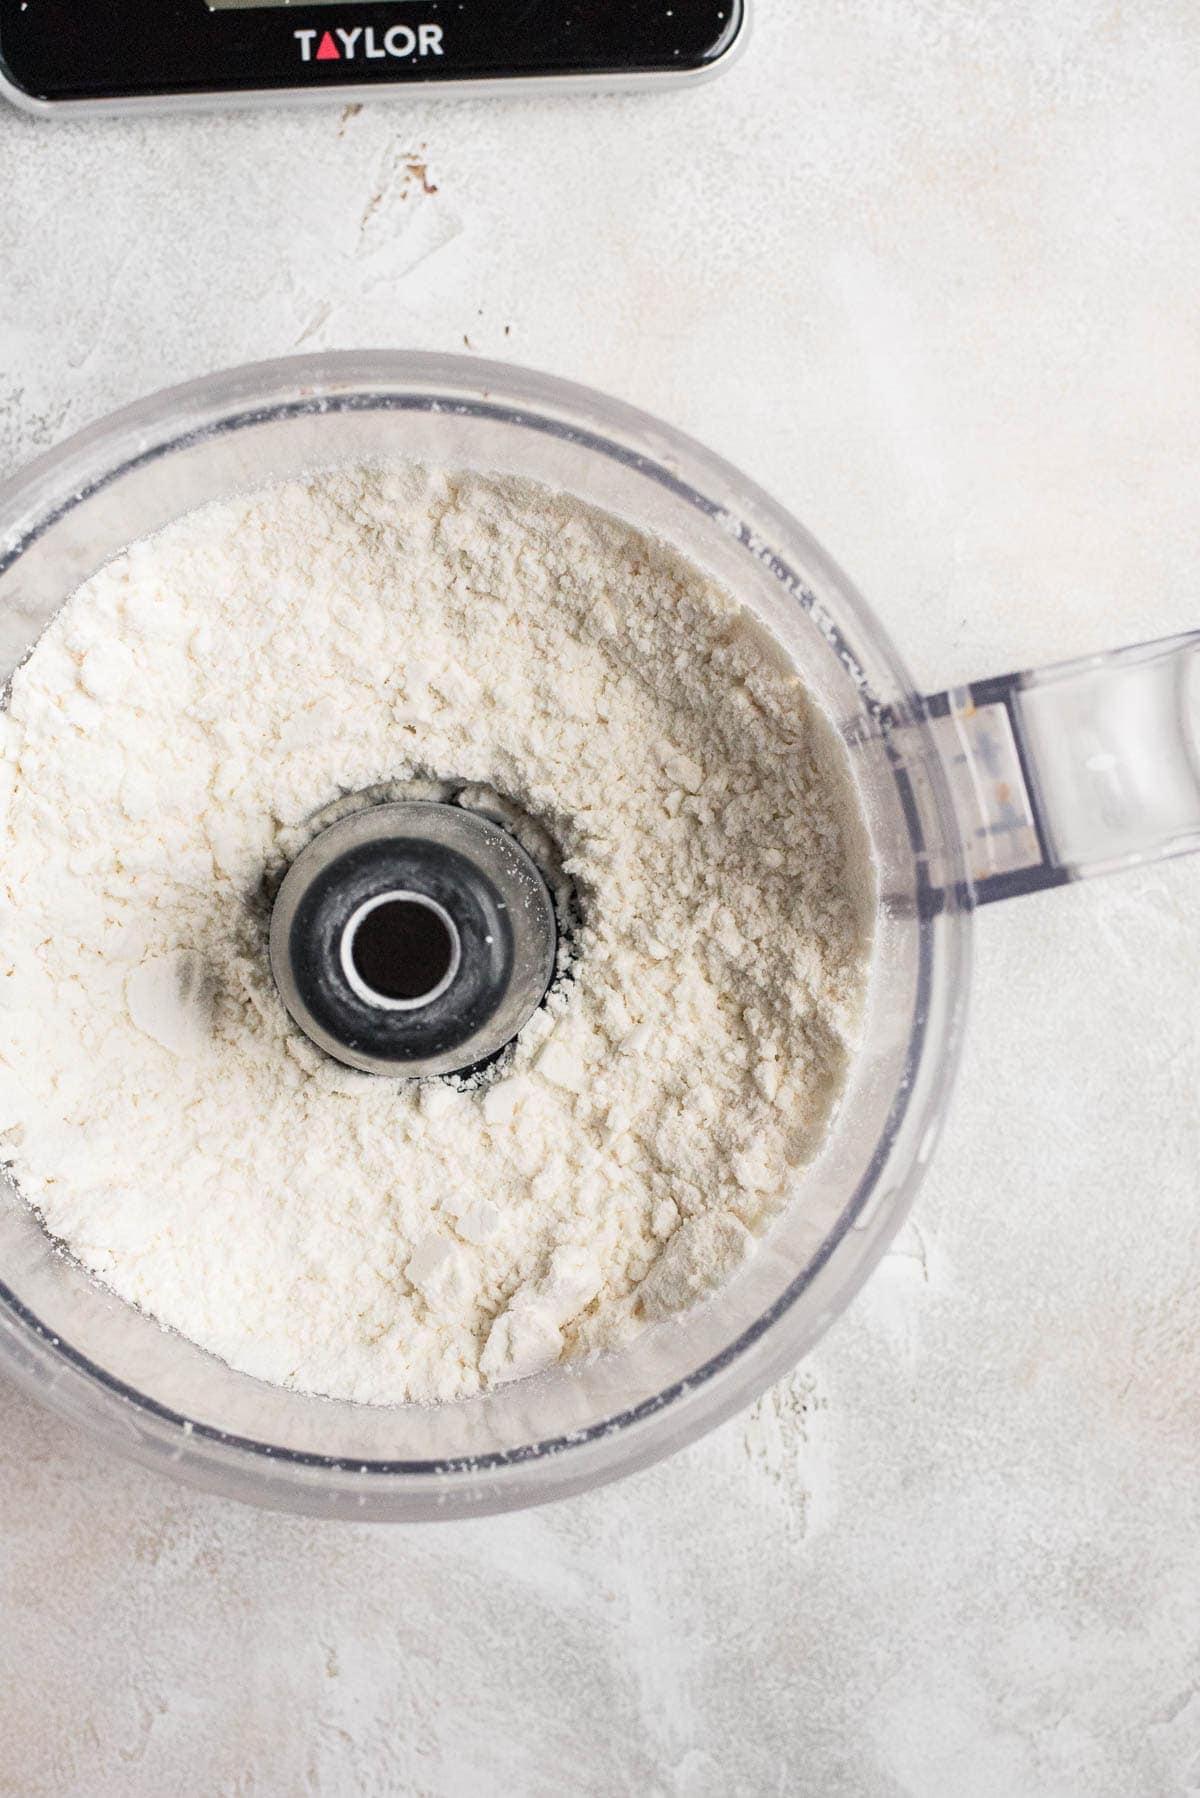 almond flour and powdered sugar mixed in food processor 